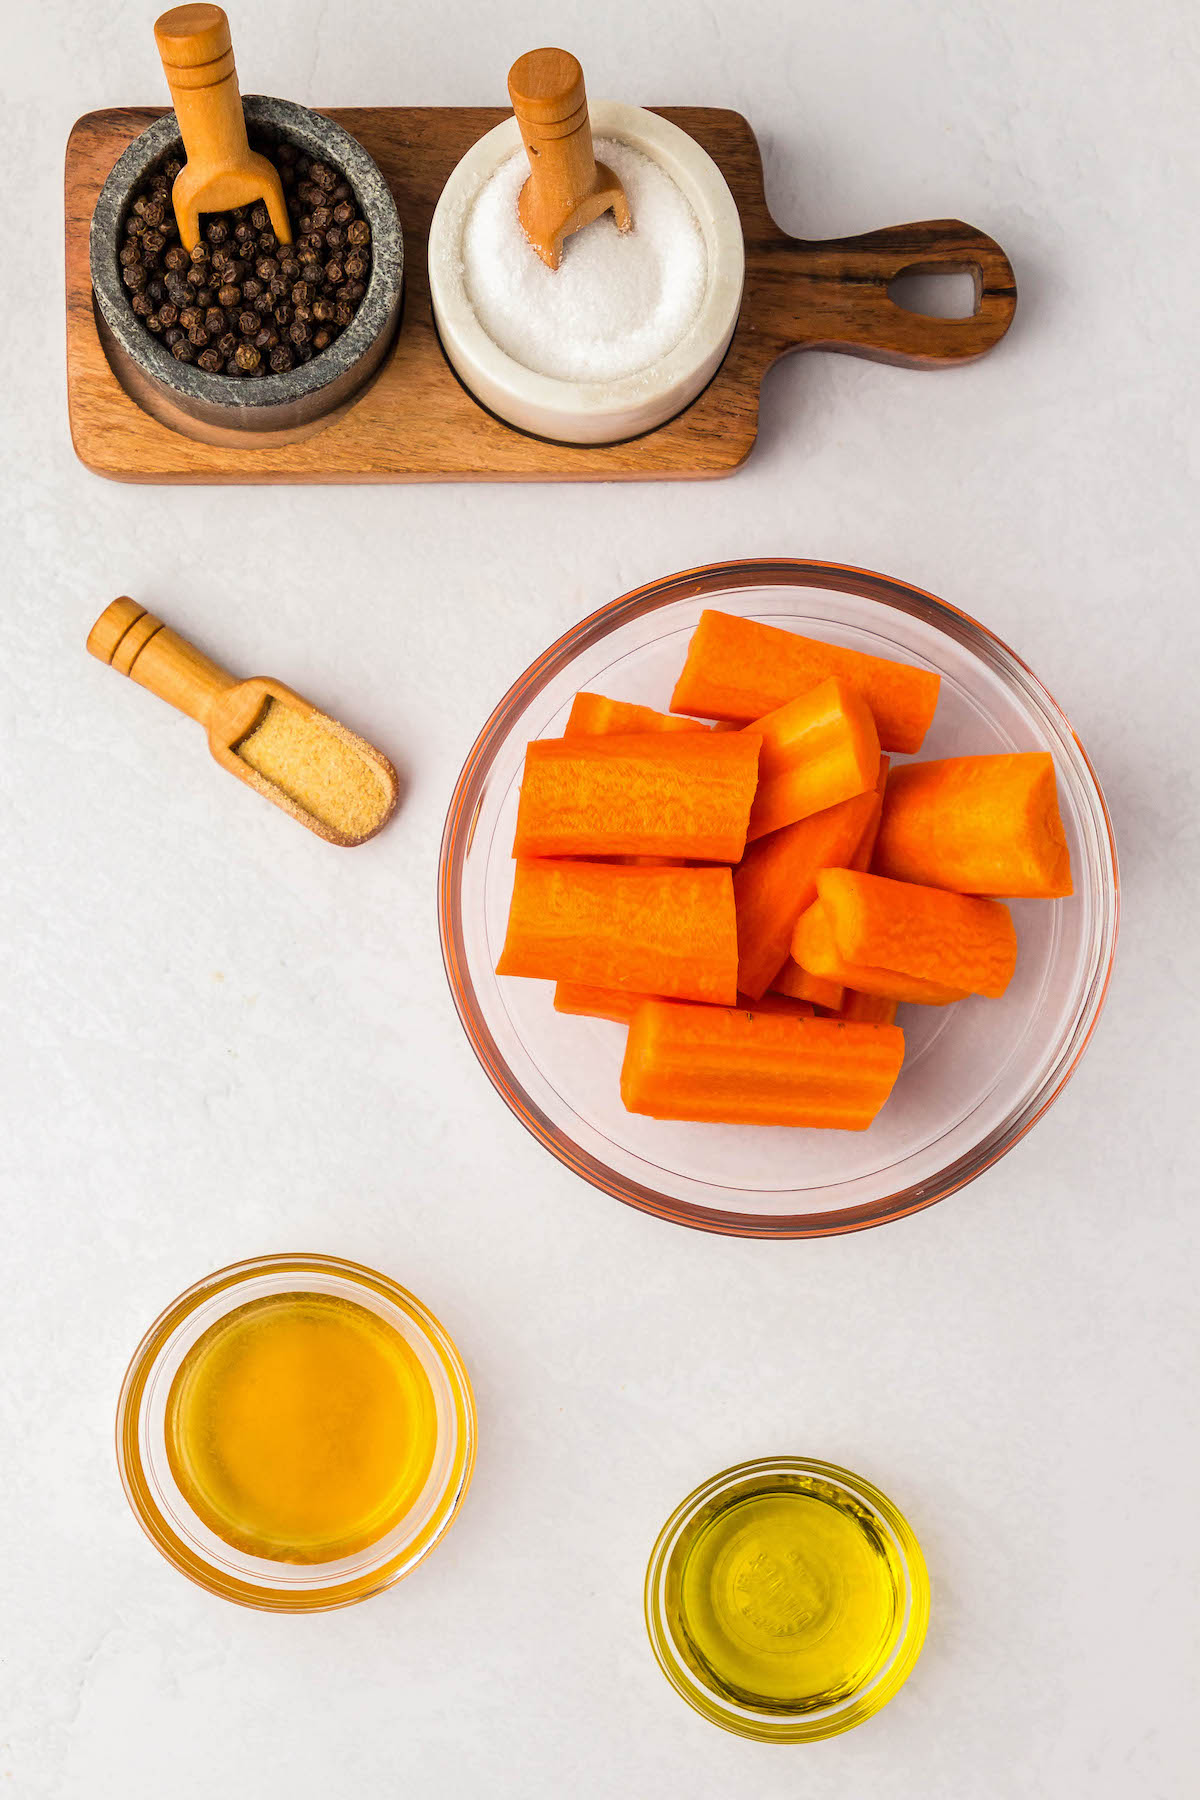 Honey, Carrots, Olive Oil, Salt, Pepper, and Garlic powder are laid out in bowls